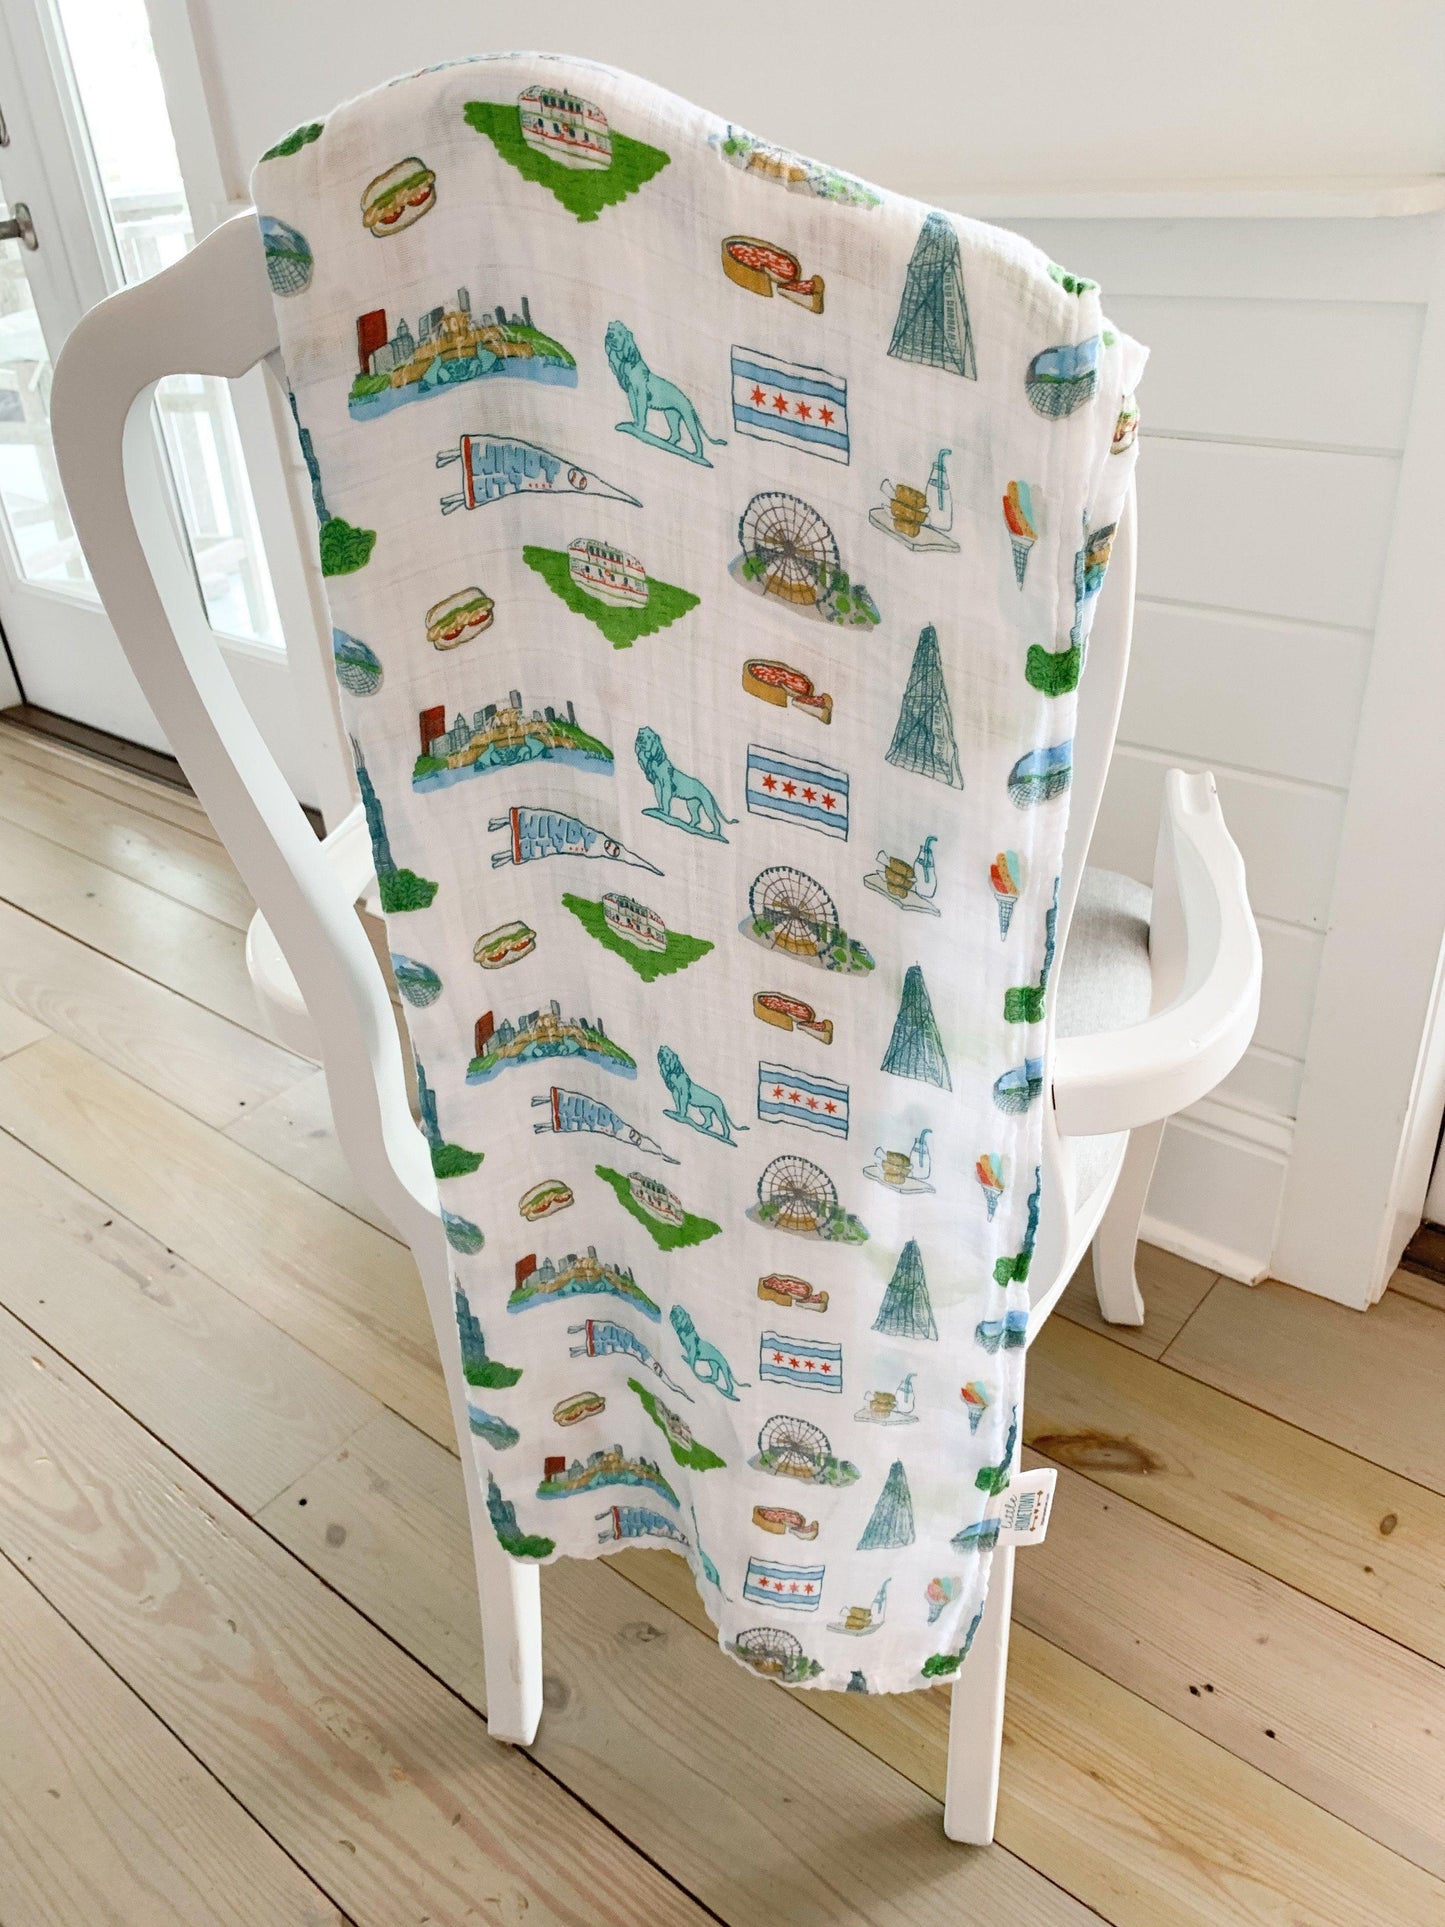 White muslin swaddle blanket with Chicago landmarks like the Willis Tower, Navy Pier, and the Bean in colorful illustrations.